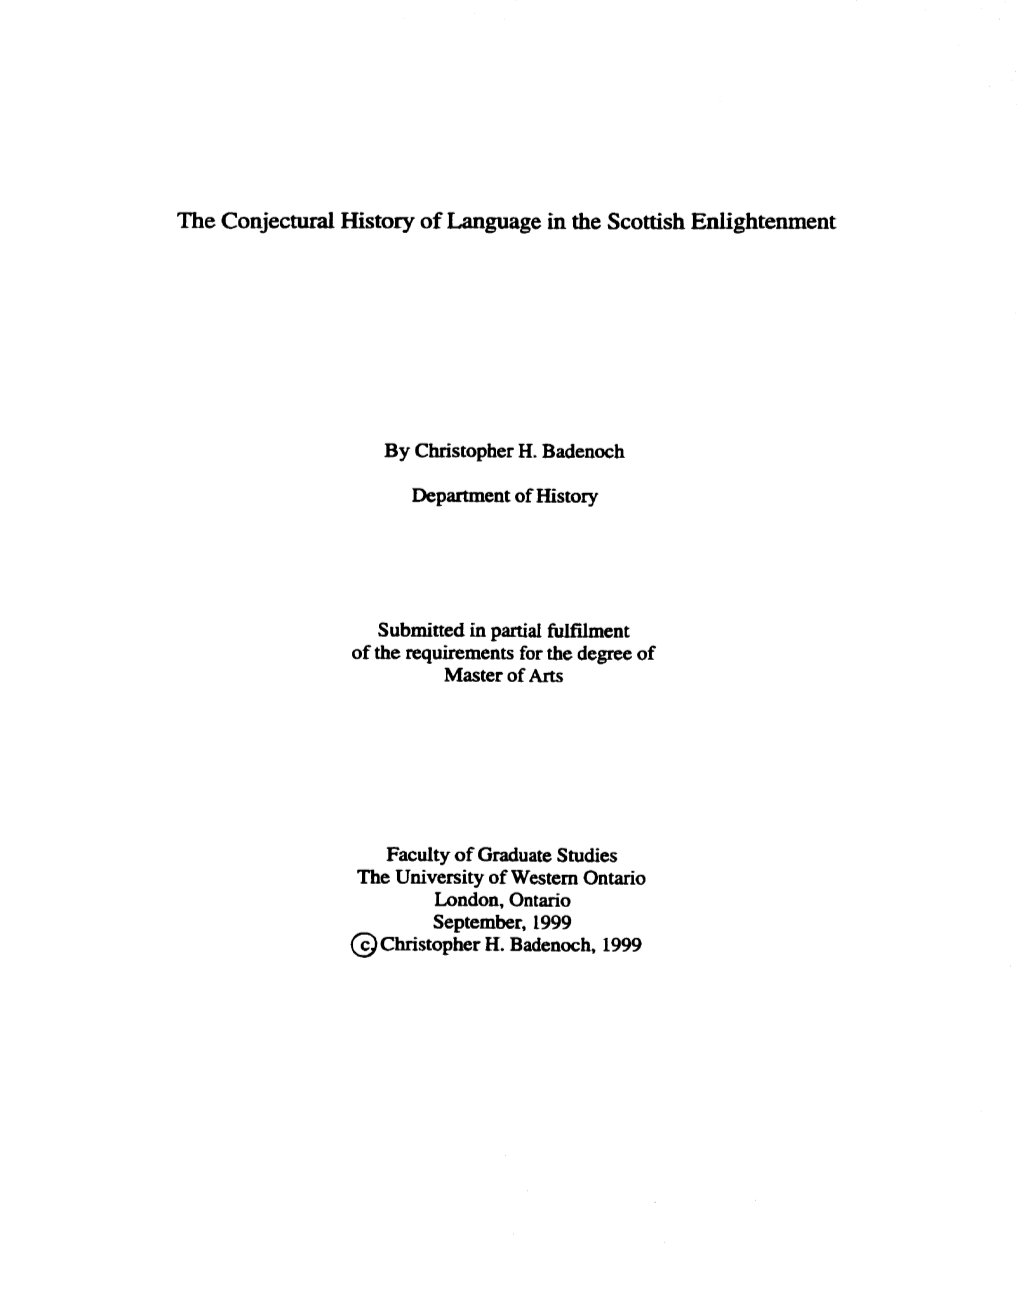 The Conjectural History of Language in the Scottish Enlightenment